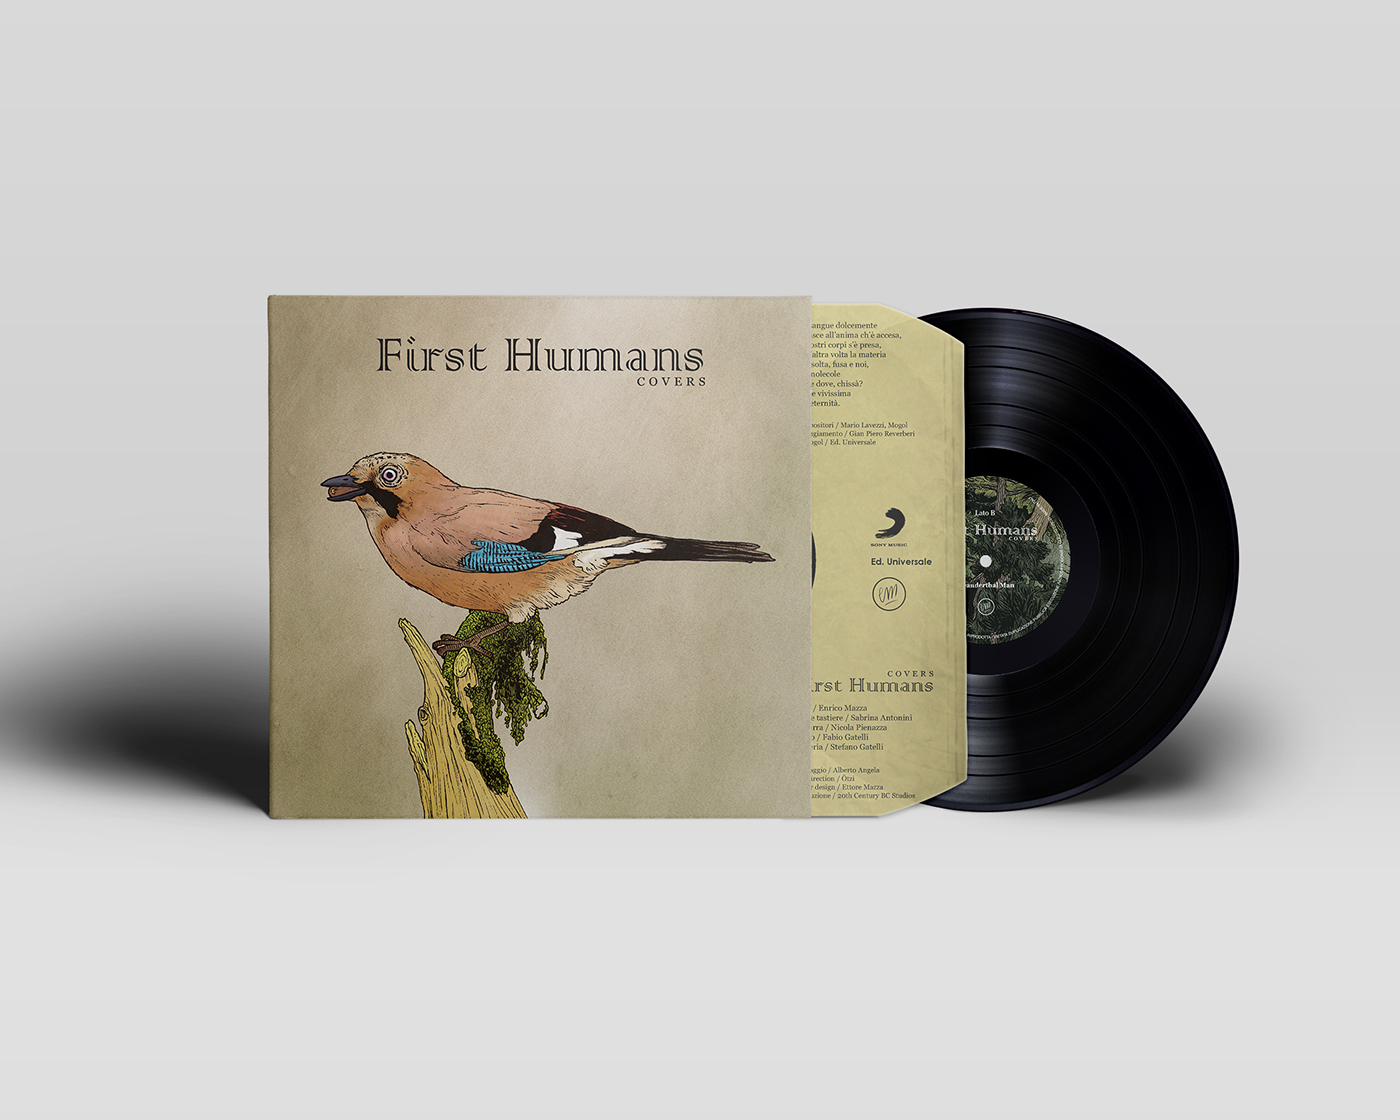 vinyl cover Packaging ILLUSTRATION  music Project brand identity